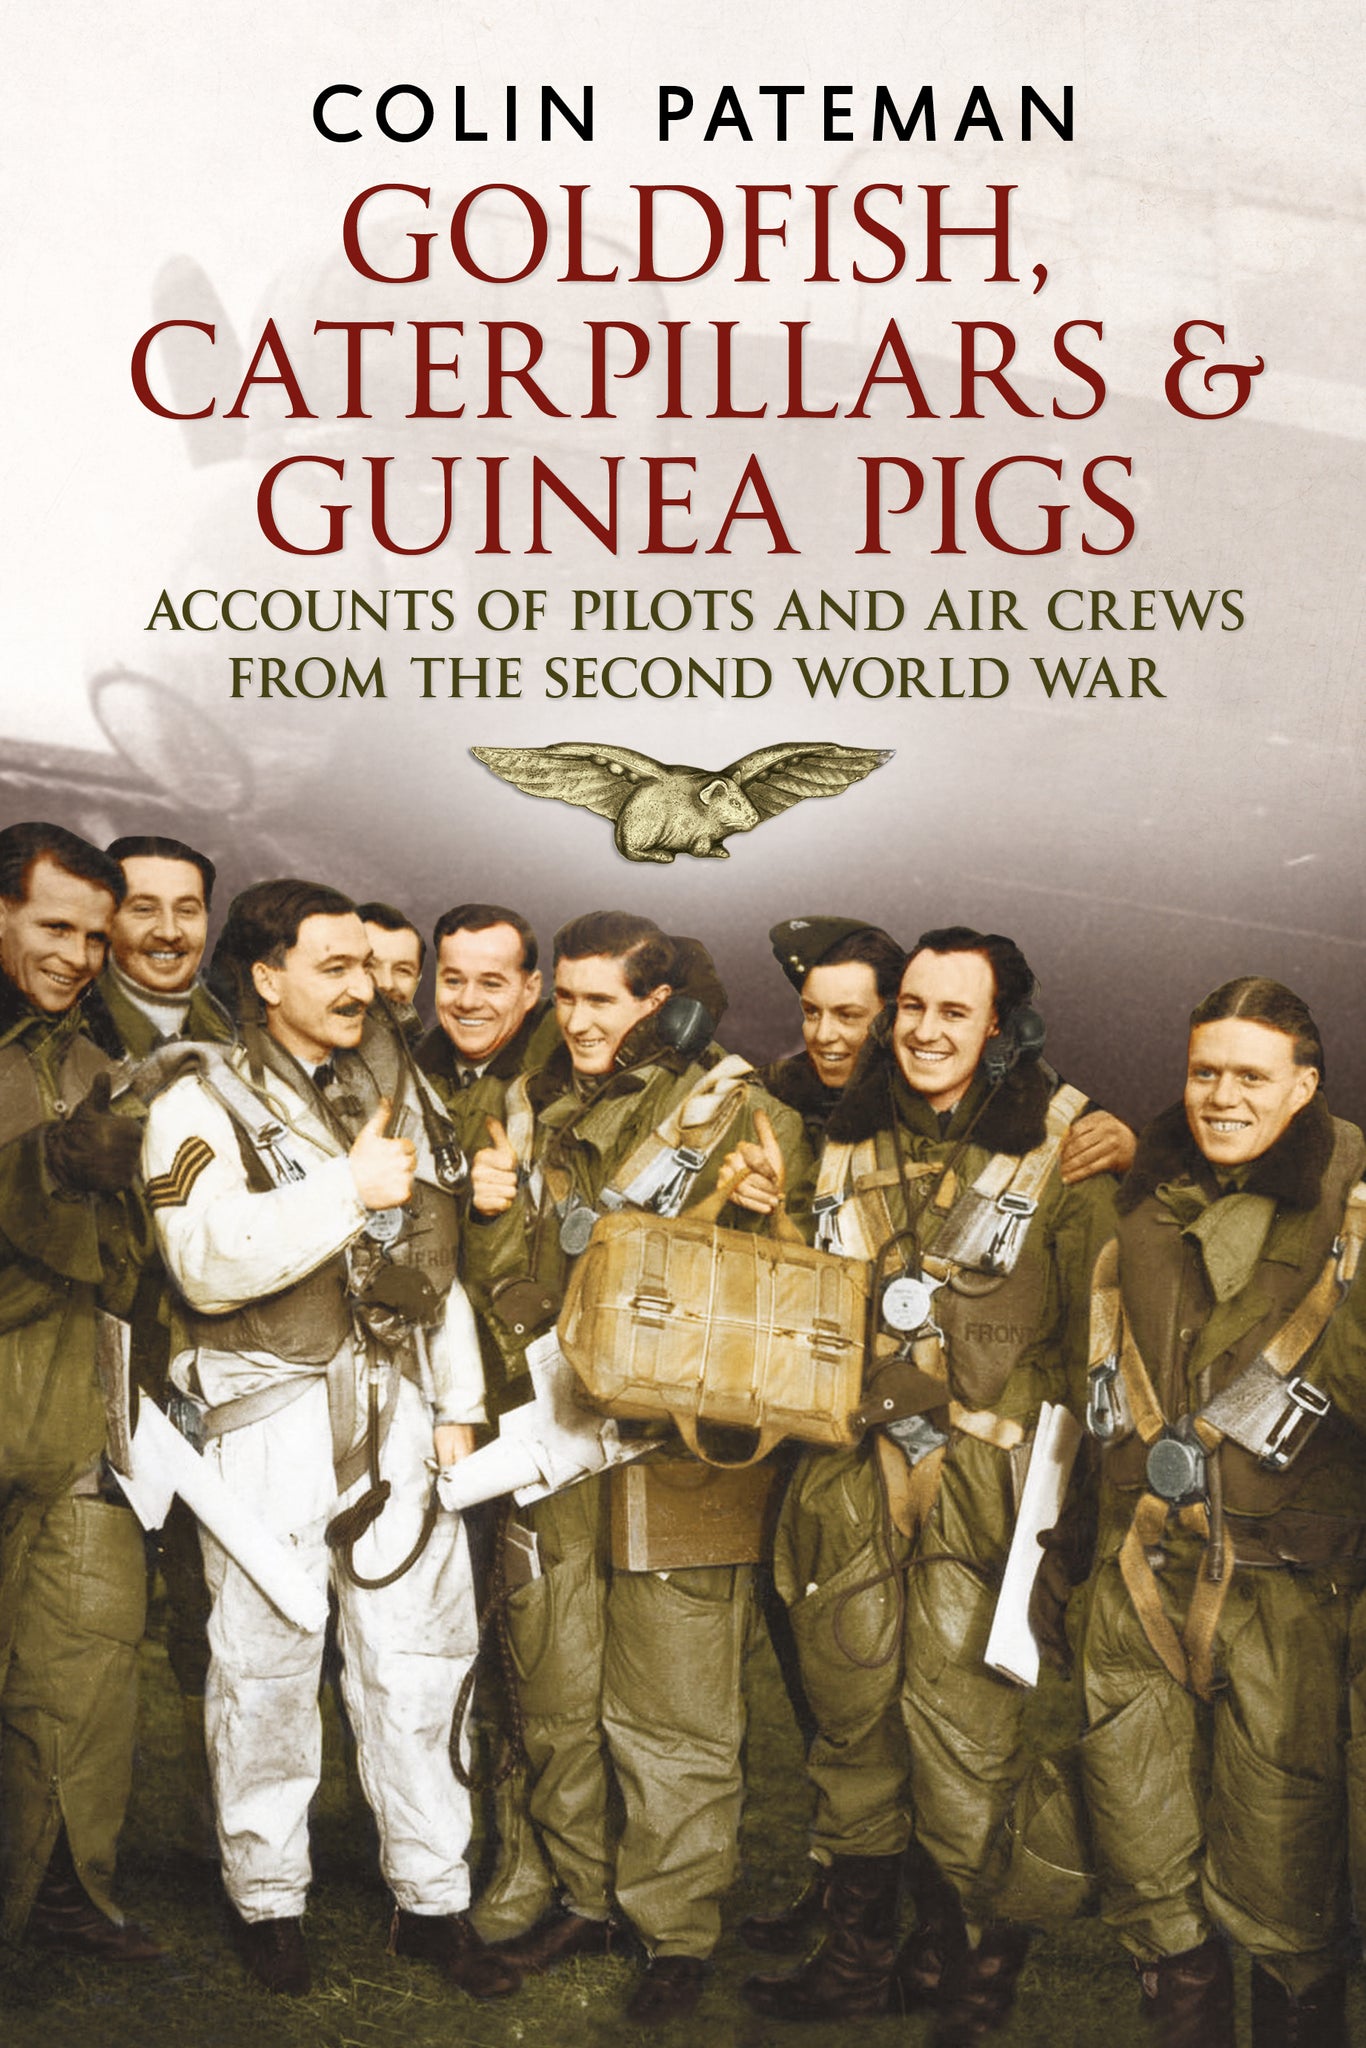 Goldfish Caterpillars & Guinea Pigs: Accounts of Pilots and Air Crews from World War II (paperback edition)